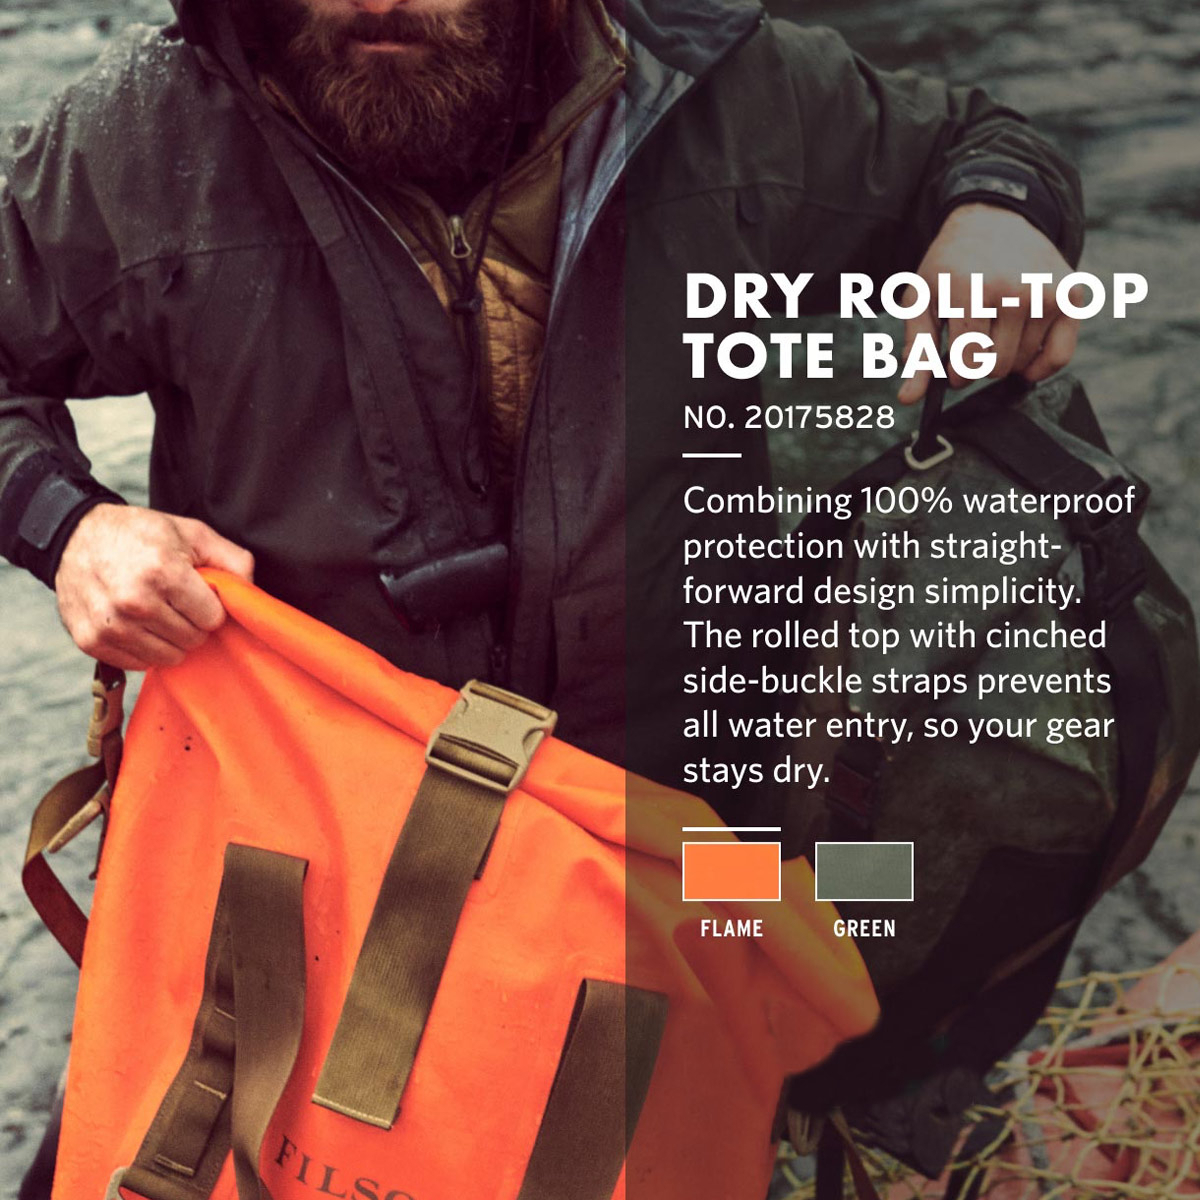 Filson Dry Roll-Top Tote Bag Flame